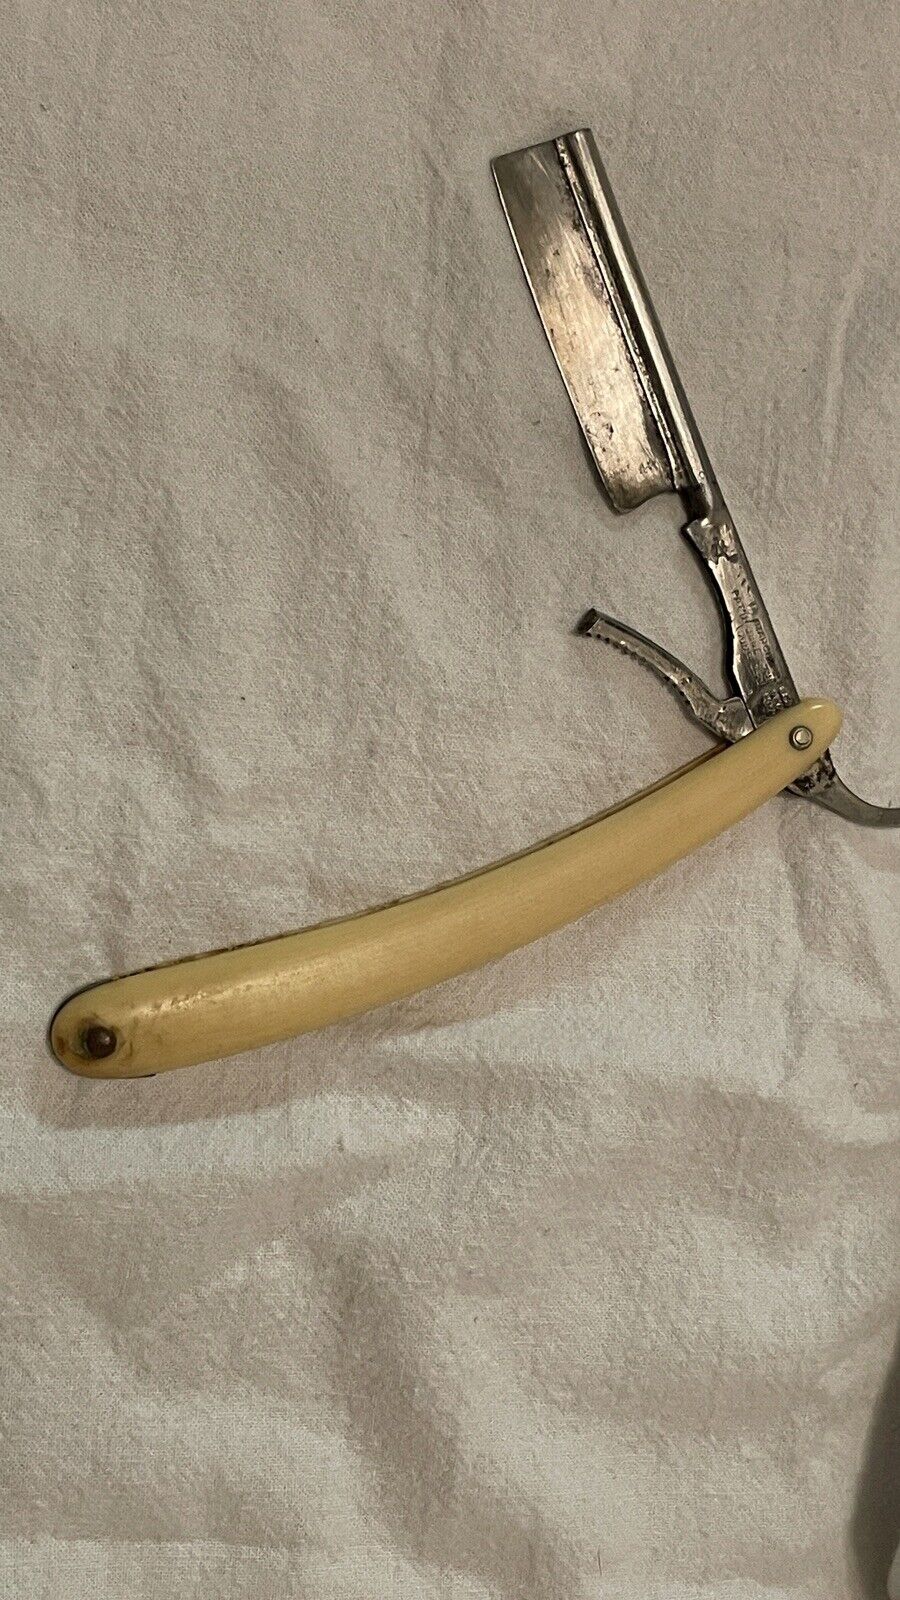 Vintage Curley's Ideal Safety Razor Straight Razor - with Patina